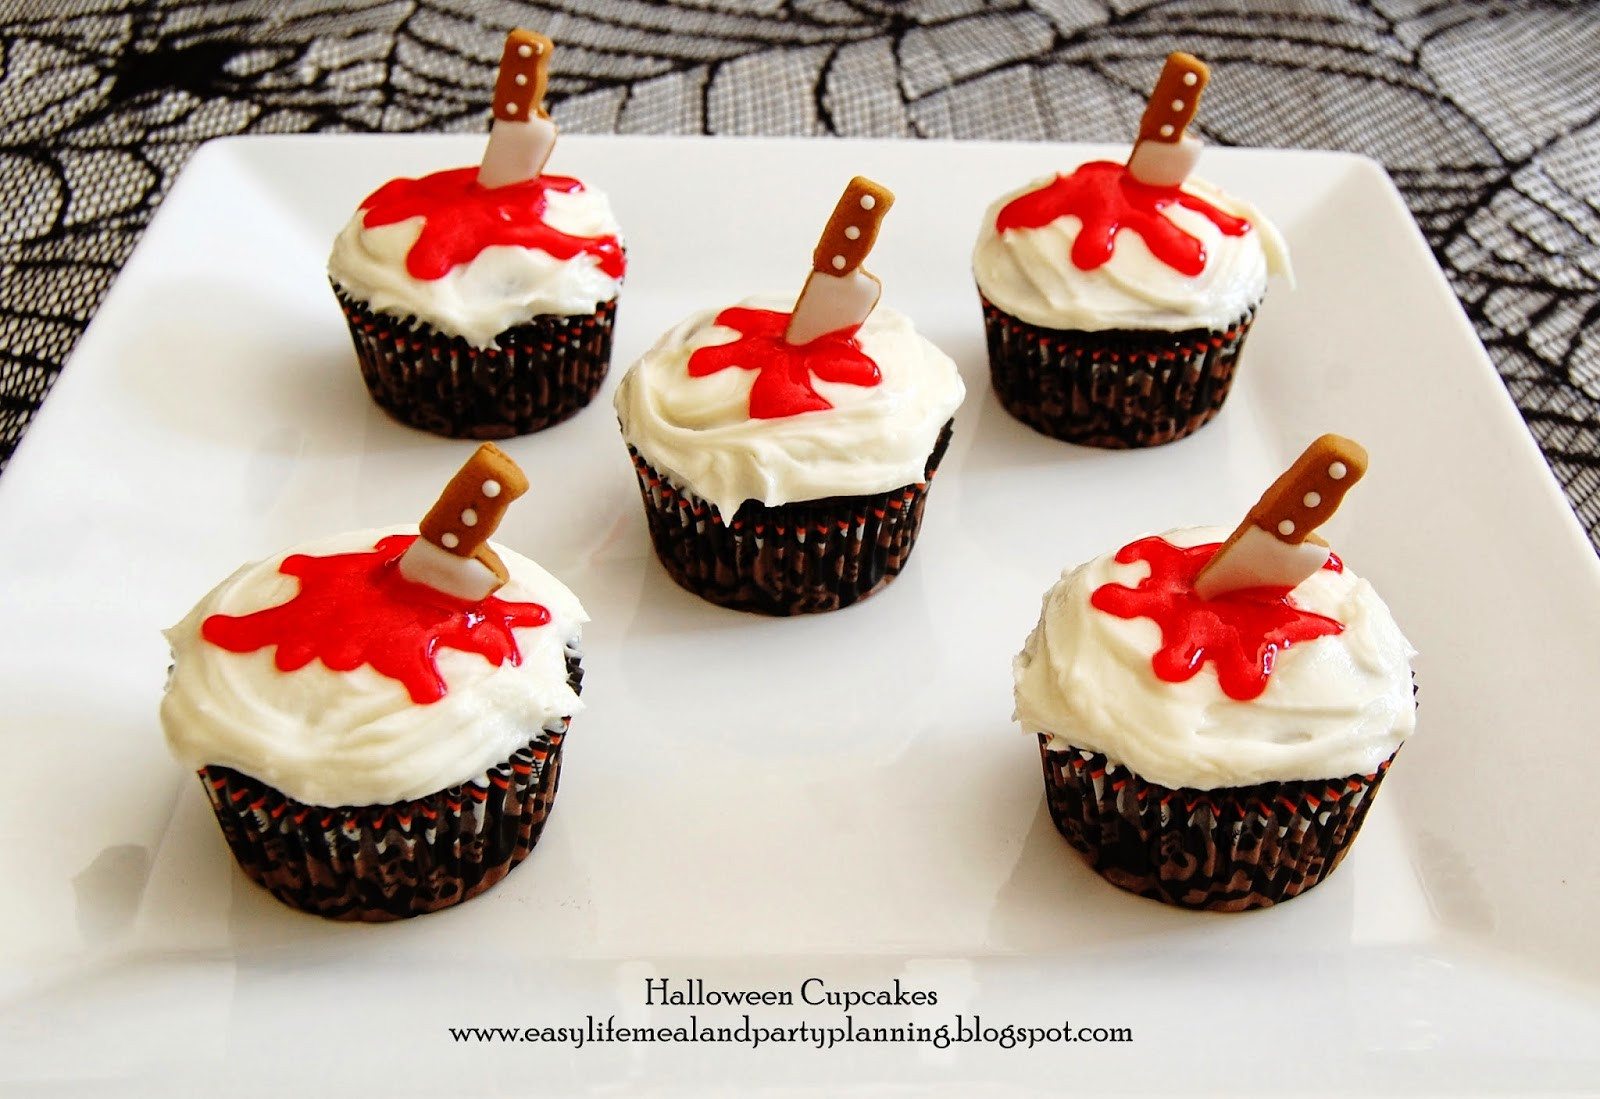 Easy Halloween Cupcakes Decorations
 Easy Life Meal and Party Planning October 2013